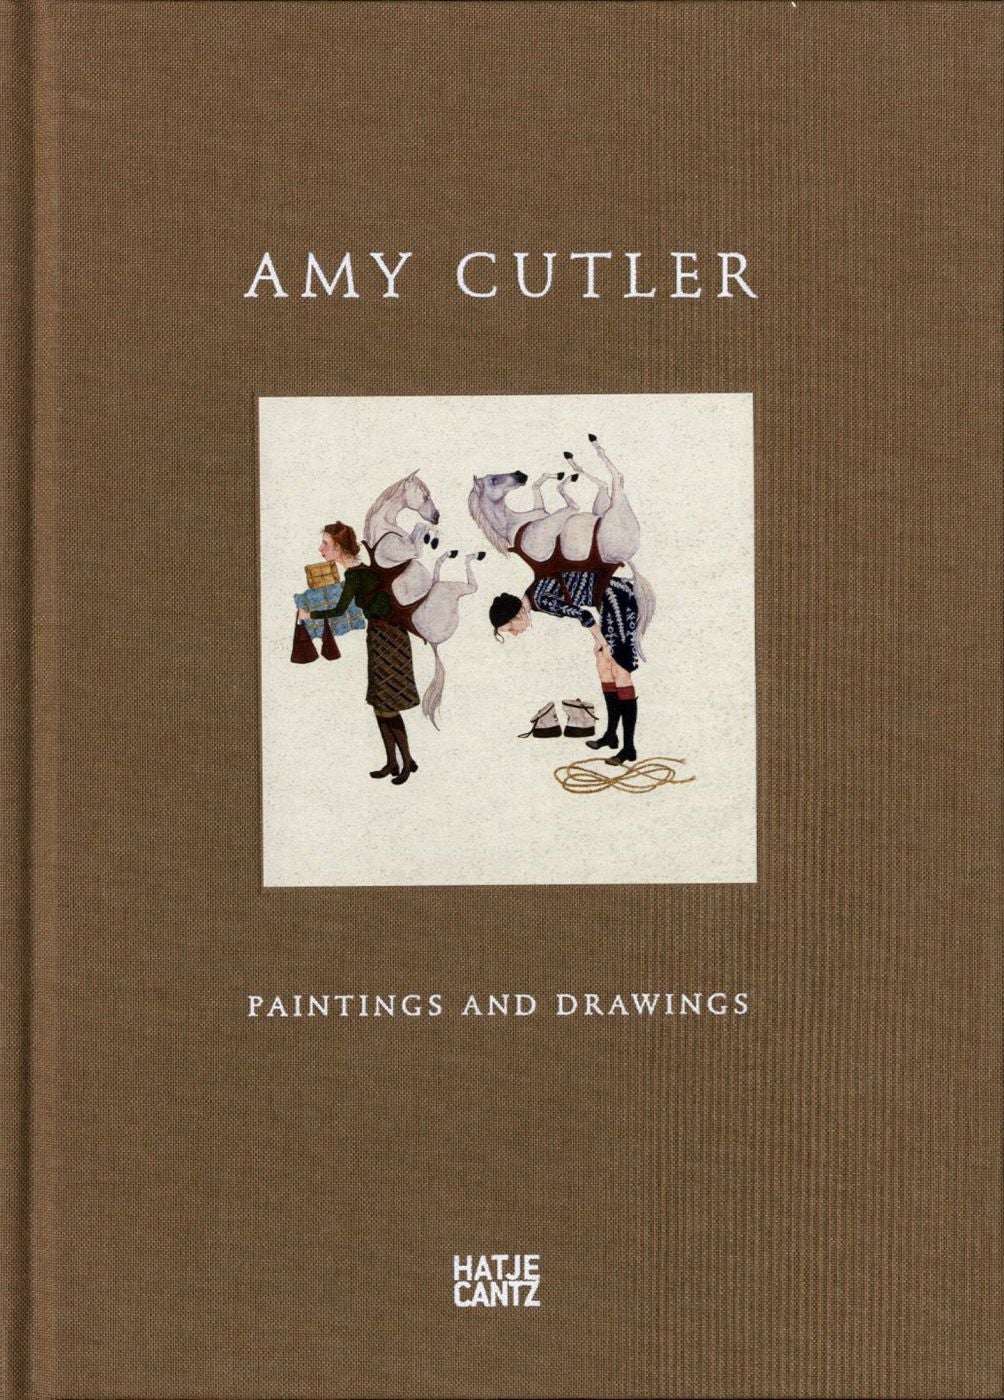 Amy Cutler: Paintings and Drawings